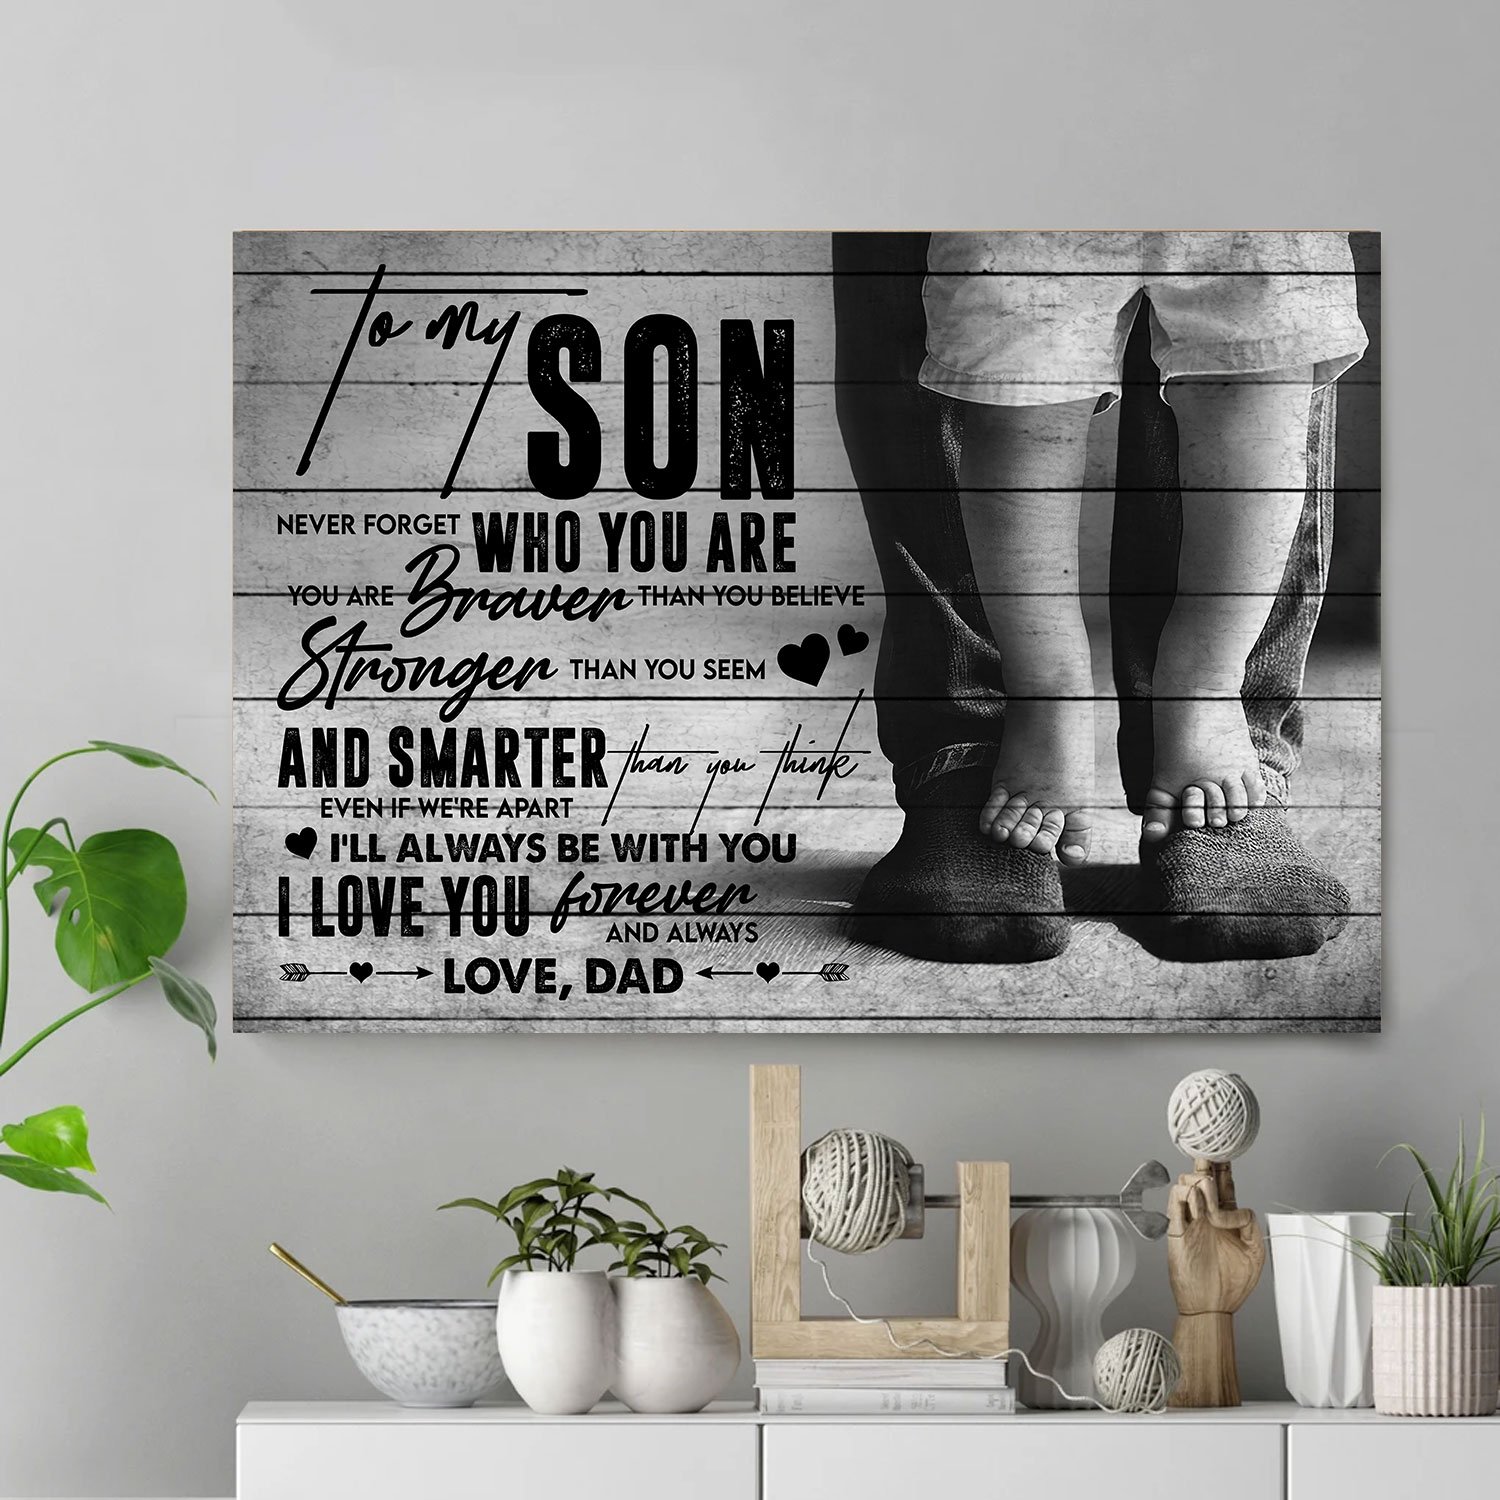 To My Son - Never Forget Who You Are - Poster - Poster Art Design